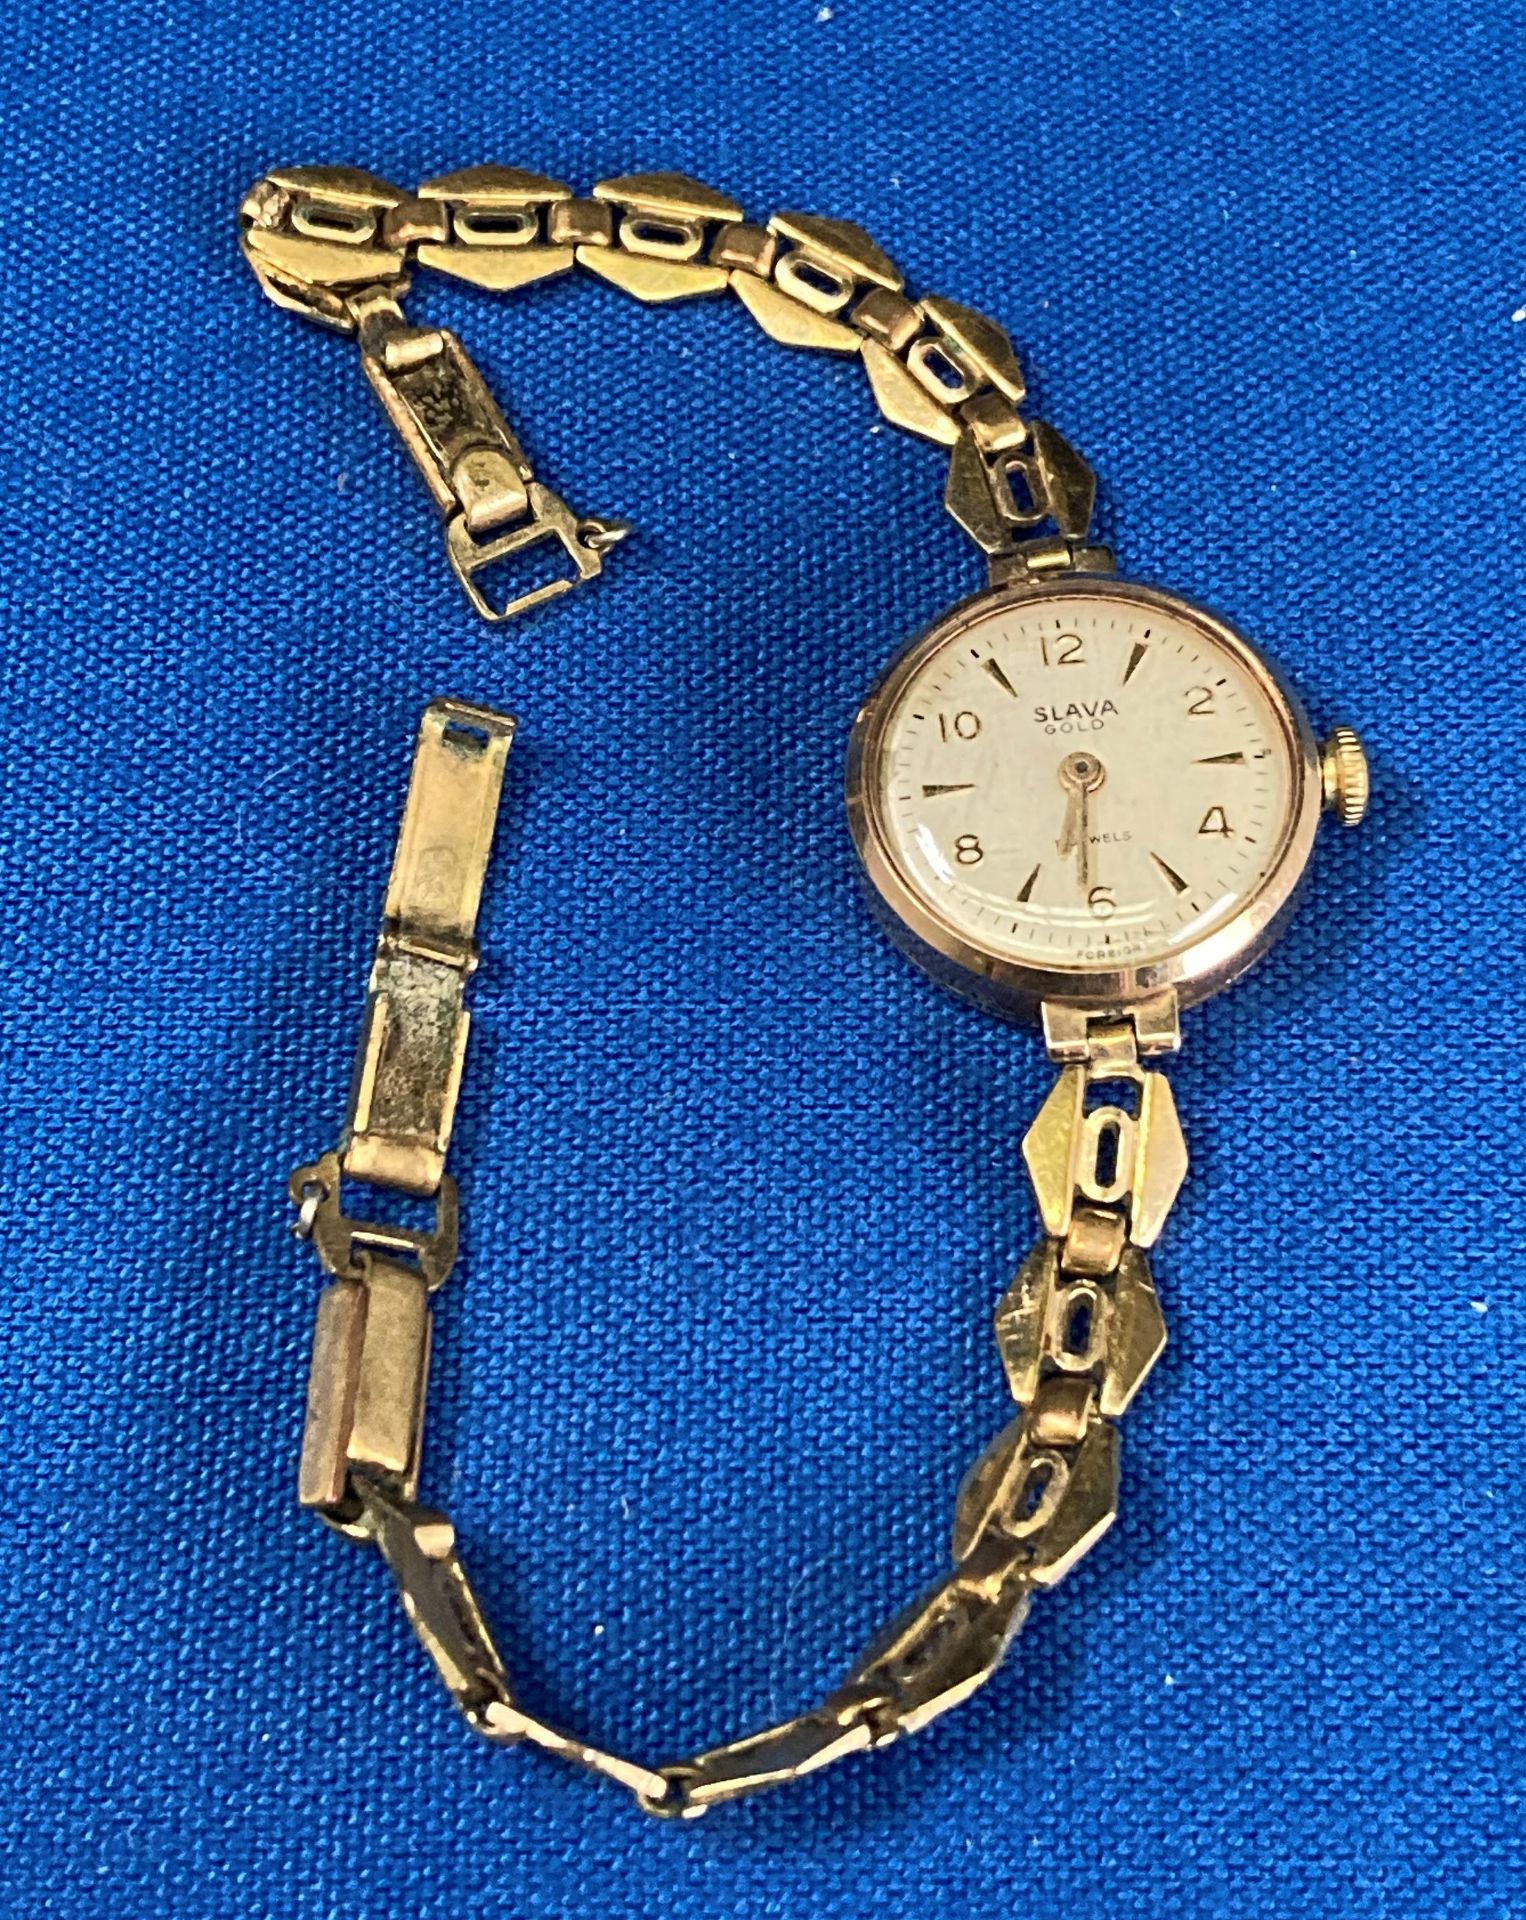 9ct gold (375) Slava gold case watch (strap - gold-plated) and a Rotary gold case watch (no strap). - Image 3 of 6